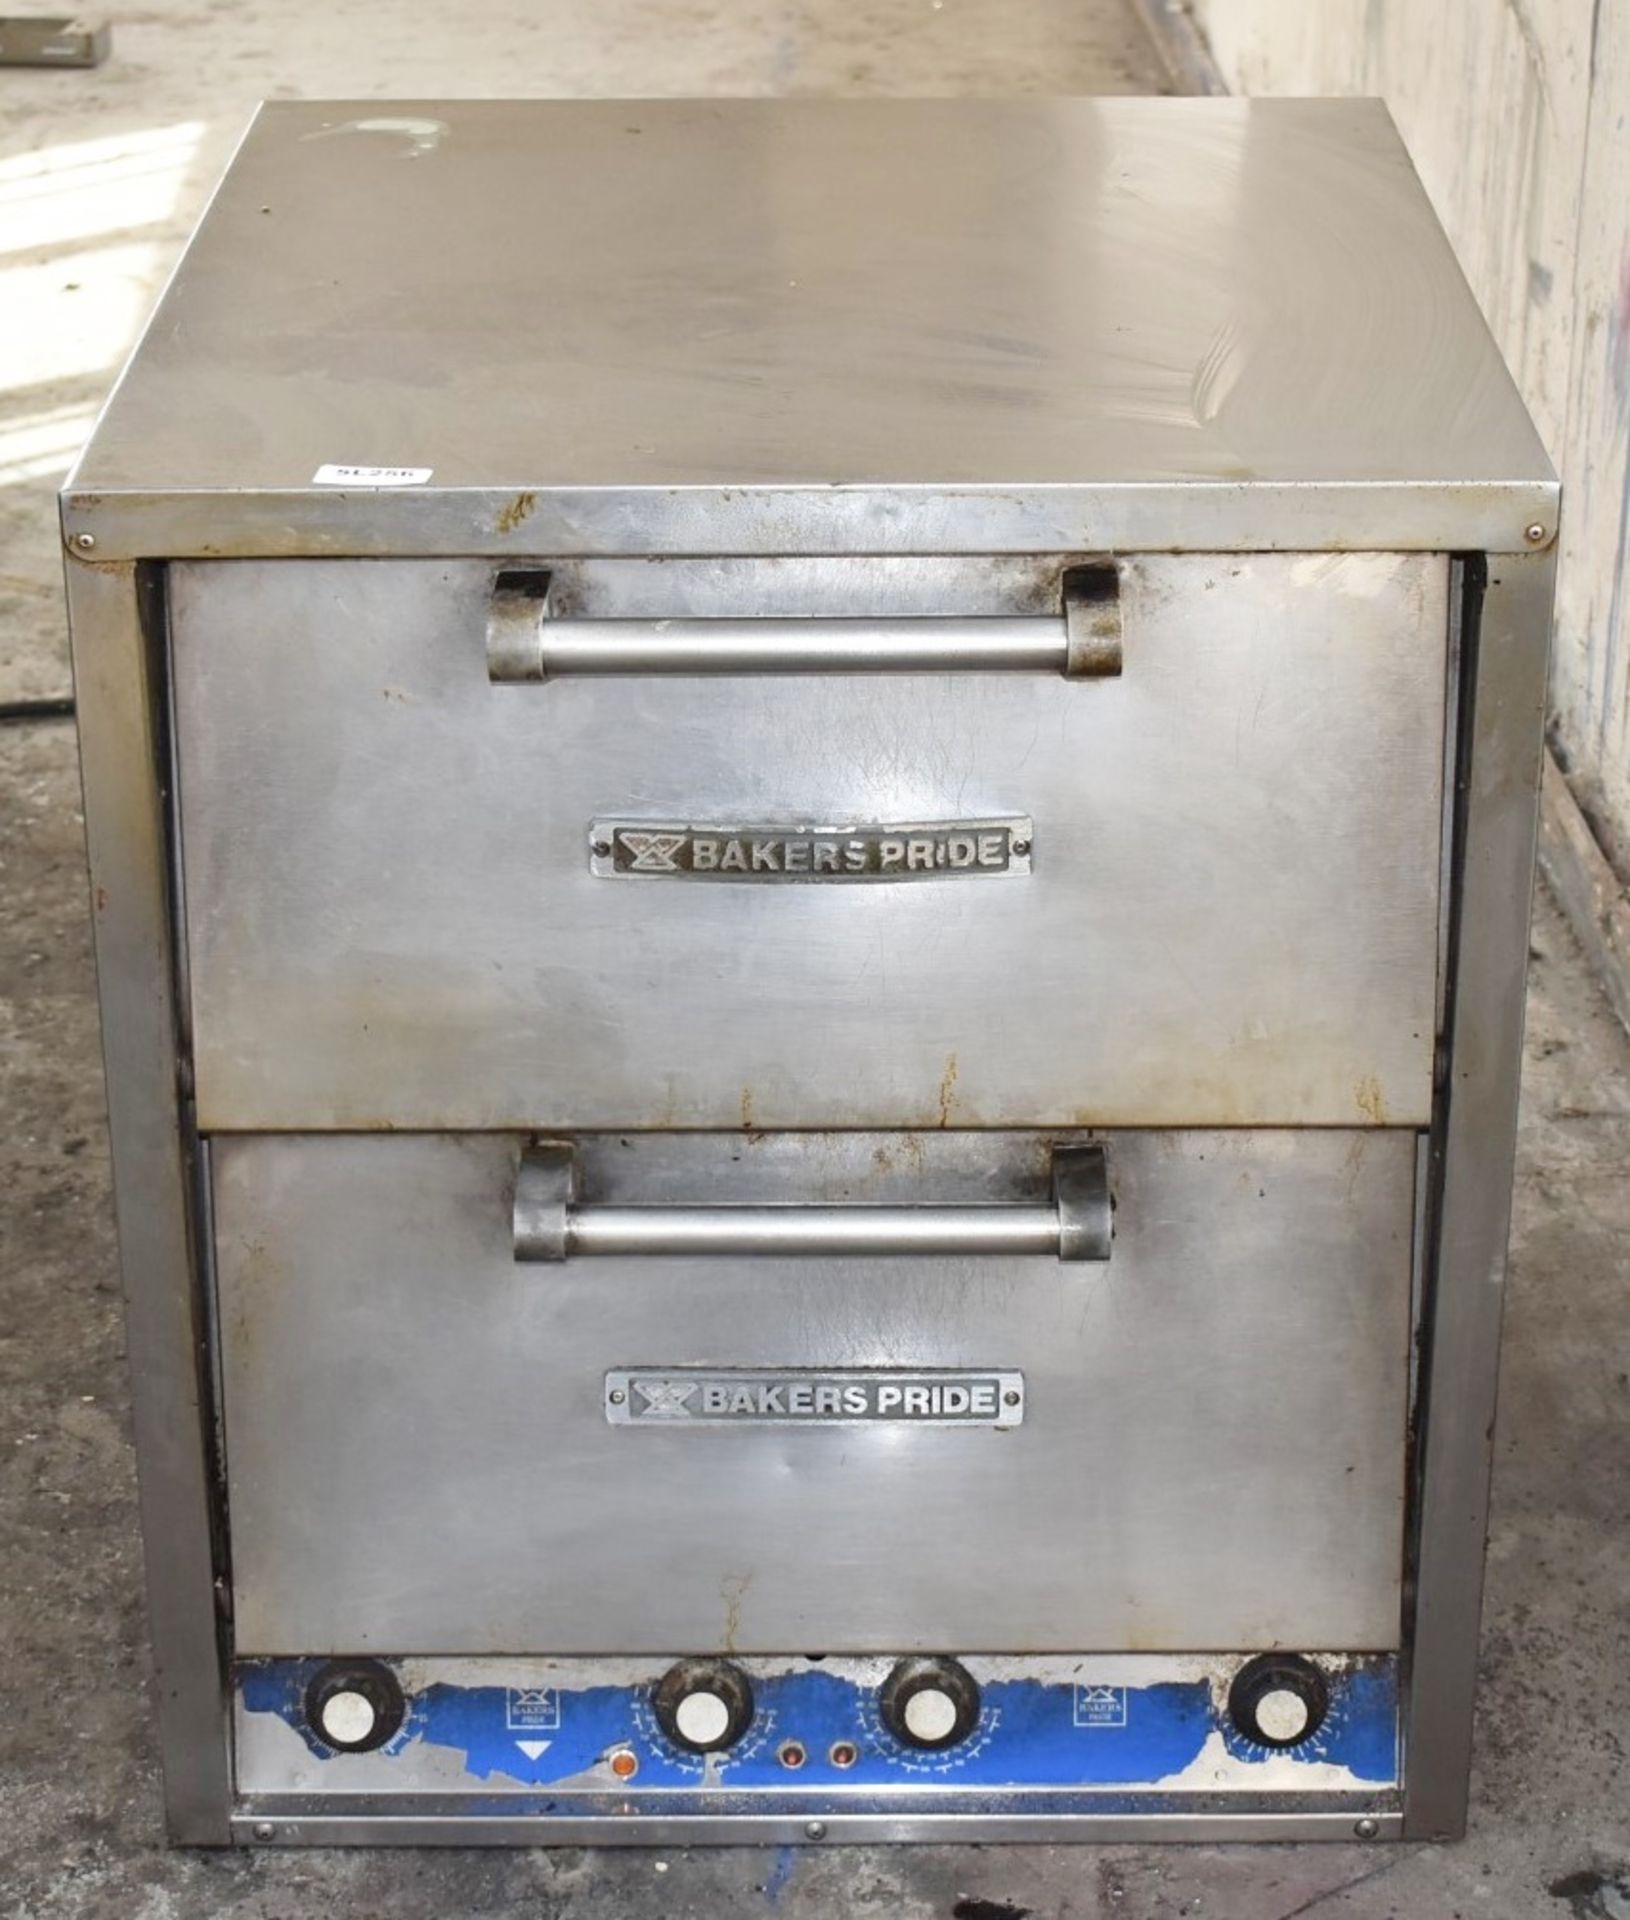 1 x Bakers Pride Commercial Twin Deck Pizza Oven - Recently Removed from a Restaurant